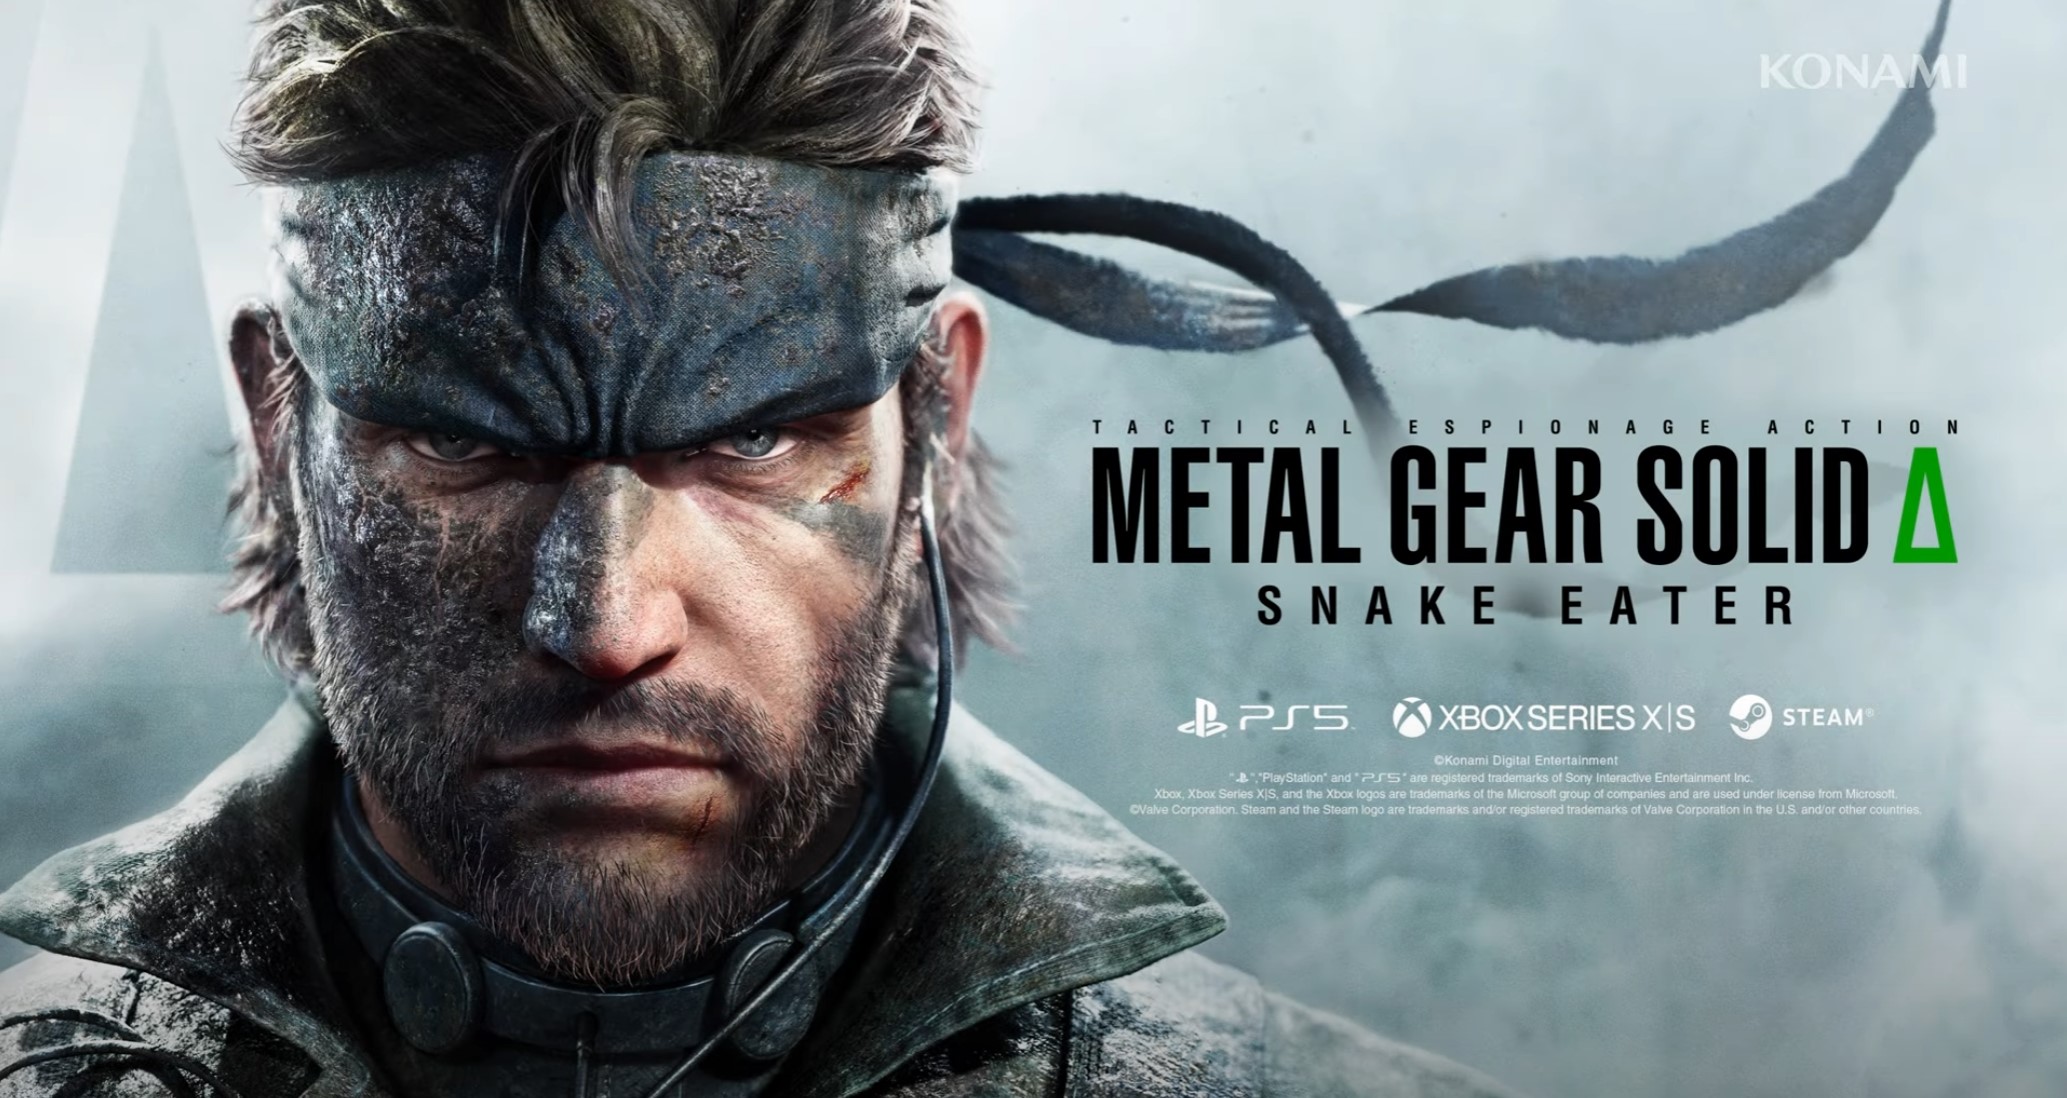 Metal Gear Solid: Master Collection Vol. 1 Review - Niche Gamer